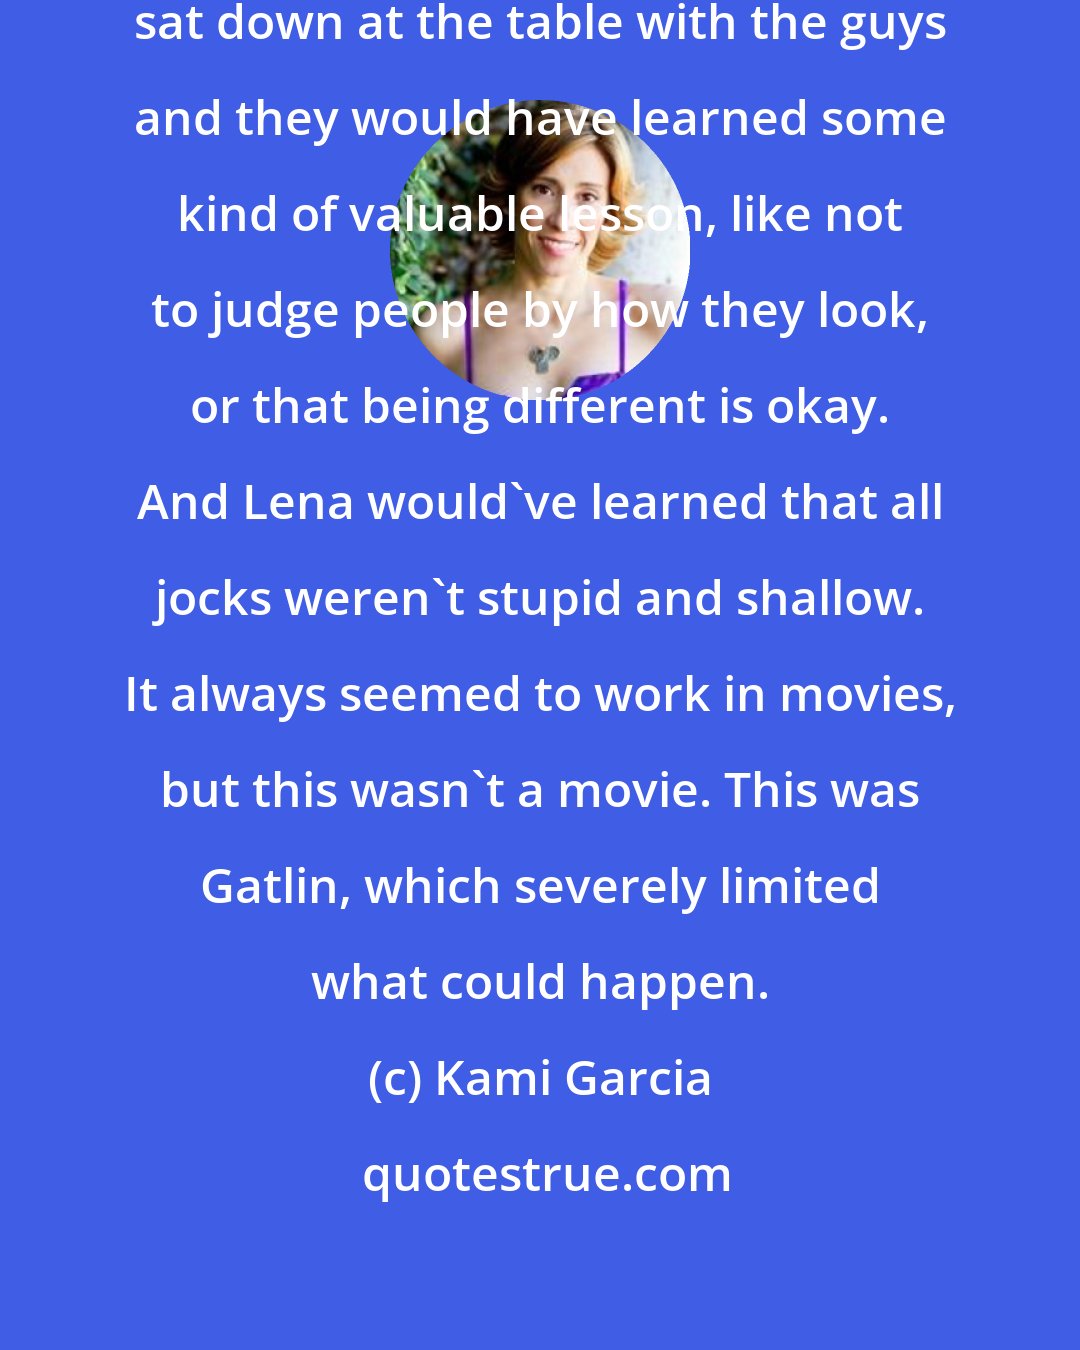 Kami Garcia: If this was a movie, we would've sat down at the table with the guys and they would have learned some kind of valuable lesson, like not to judge people by how they look, or that being different is okay. And Lena would've learned that all jocks weren't stupid and shallow. It always seemed to work in movies, but this wasn't a movie. This was Gatlin, which severely limited what could happen.